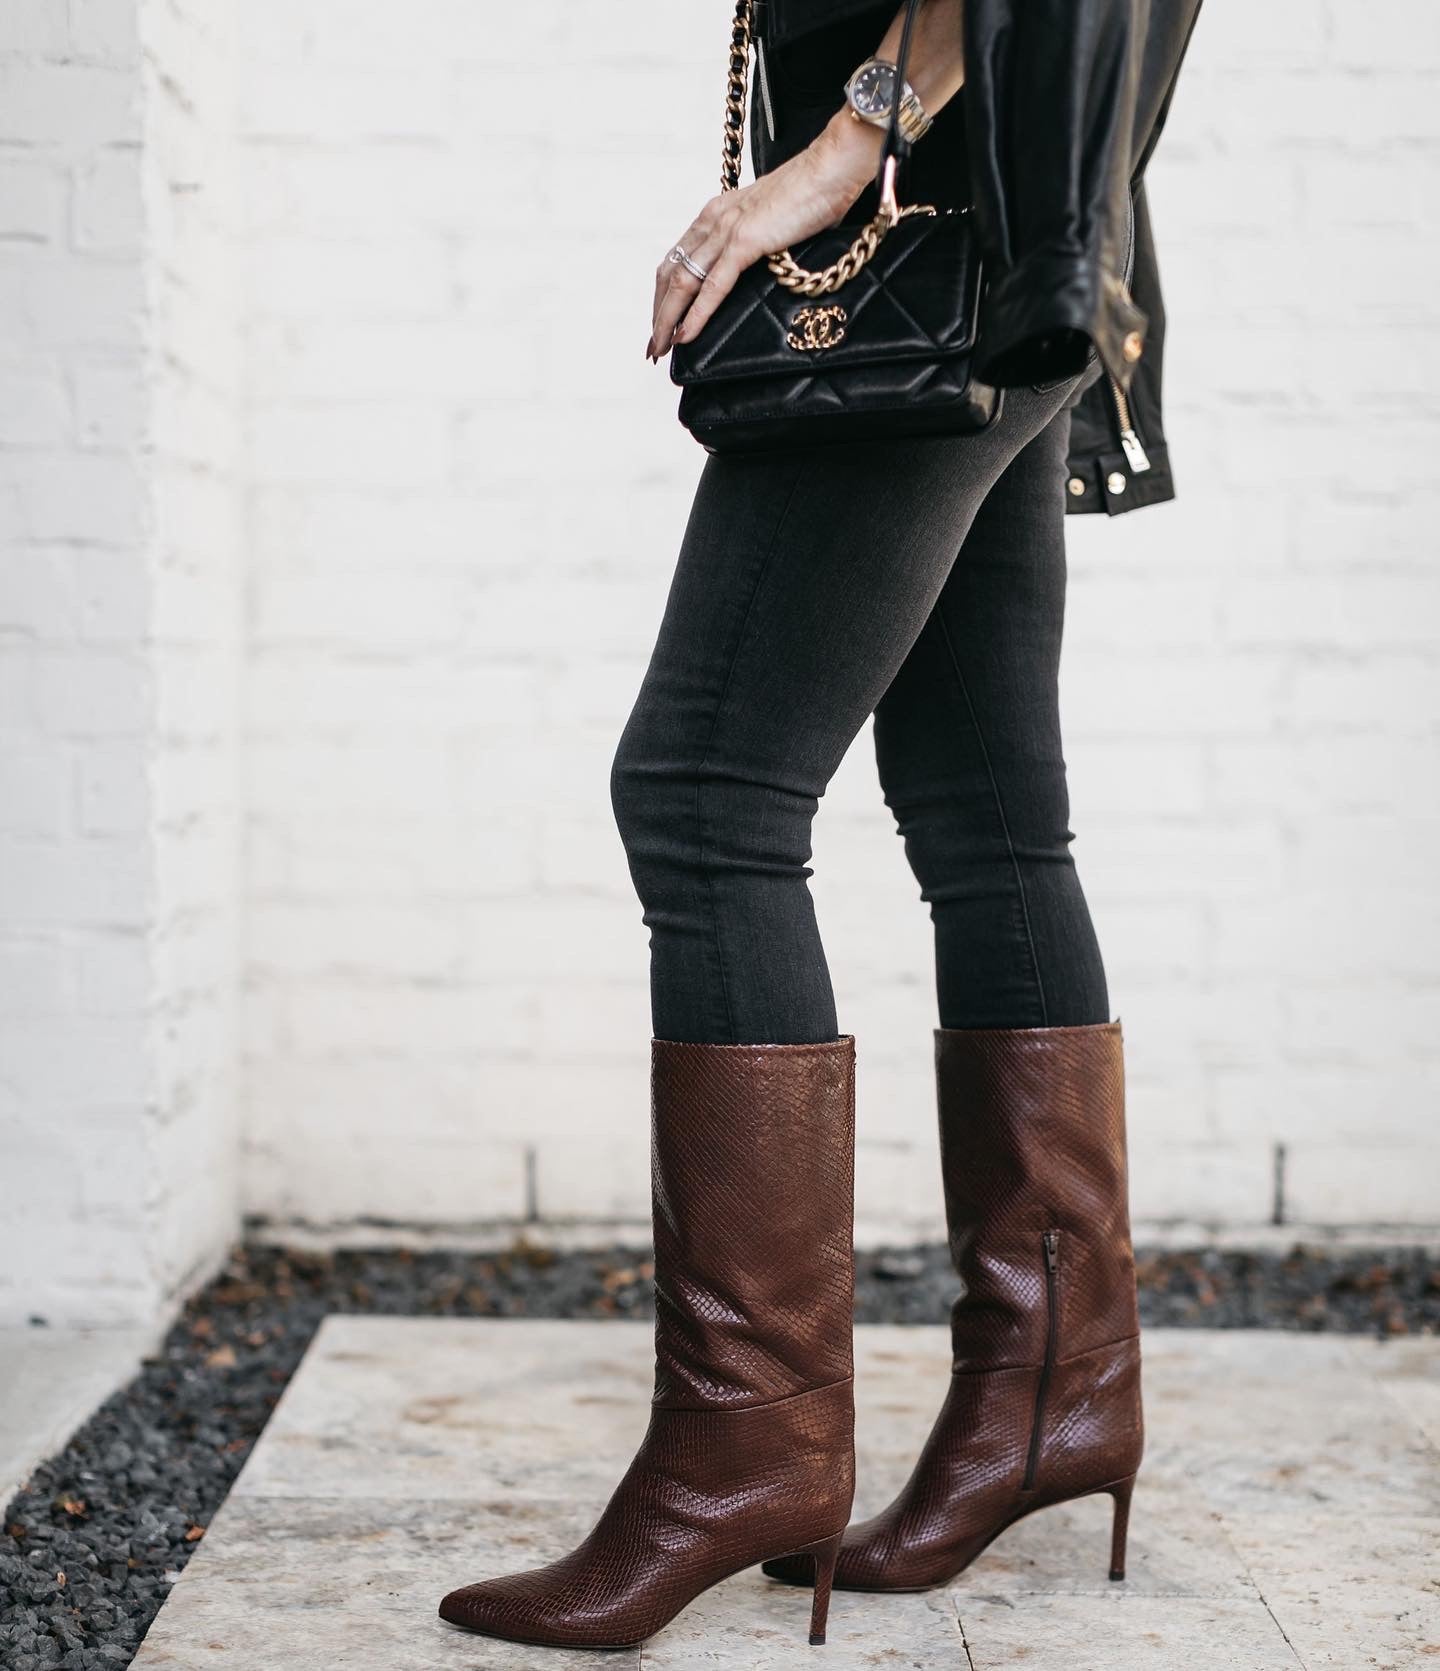 These killer boots are amazing for so many reasons! I adore this rich chocolate brown shade and since the heel height is only 2.8 inches they’re extremely comfortable!